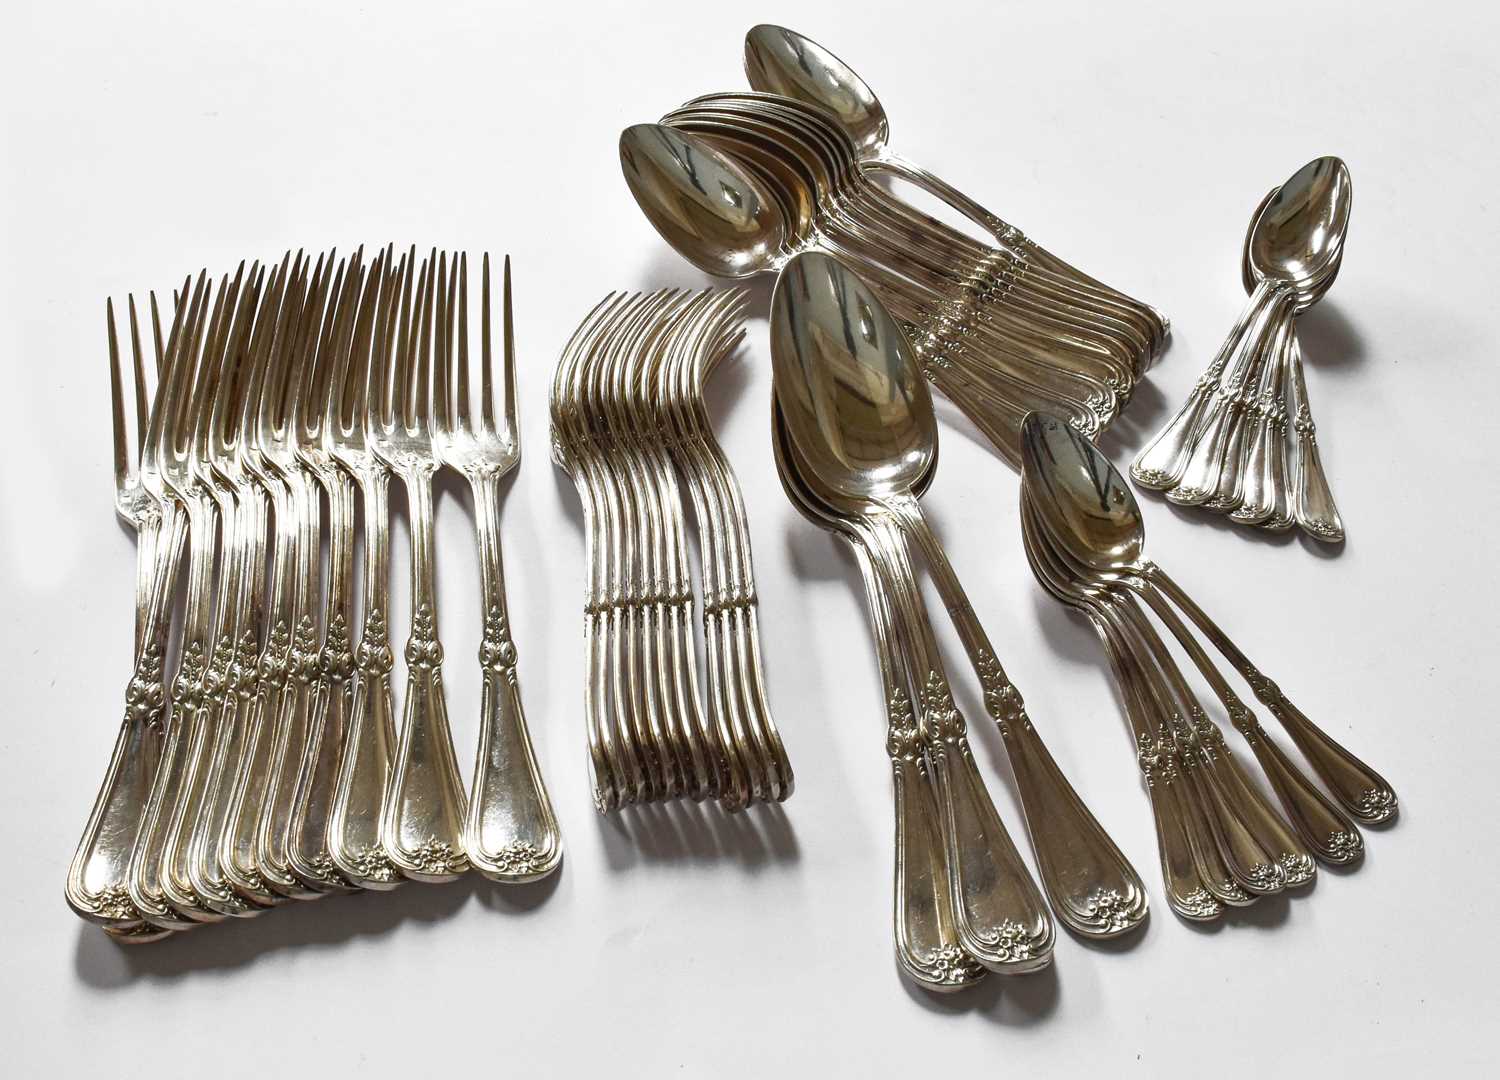 A French Silver Plate Table-Service, by Christofle, Paris, late 19th century, each piece with